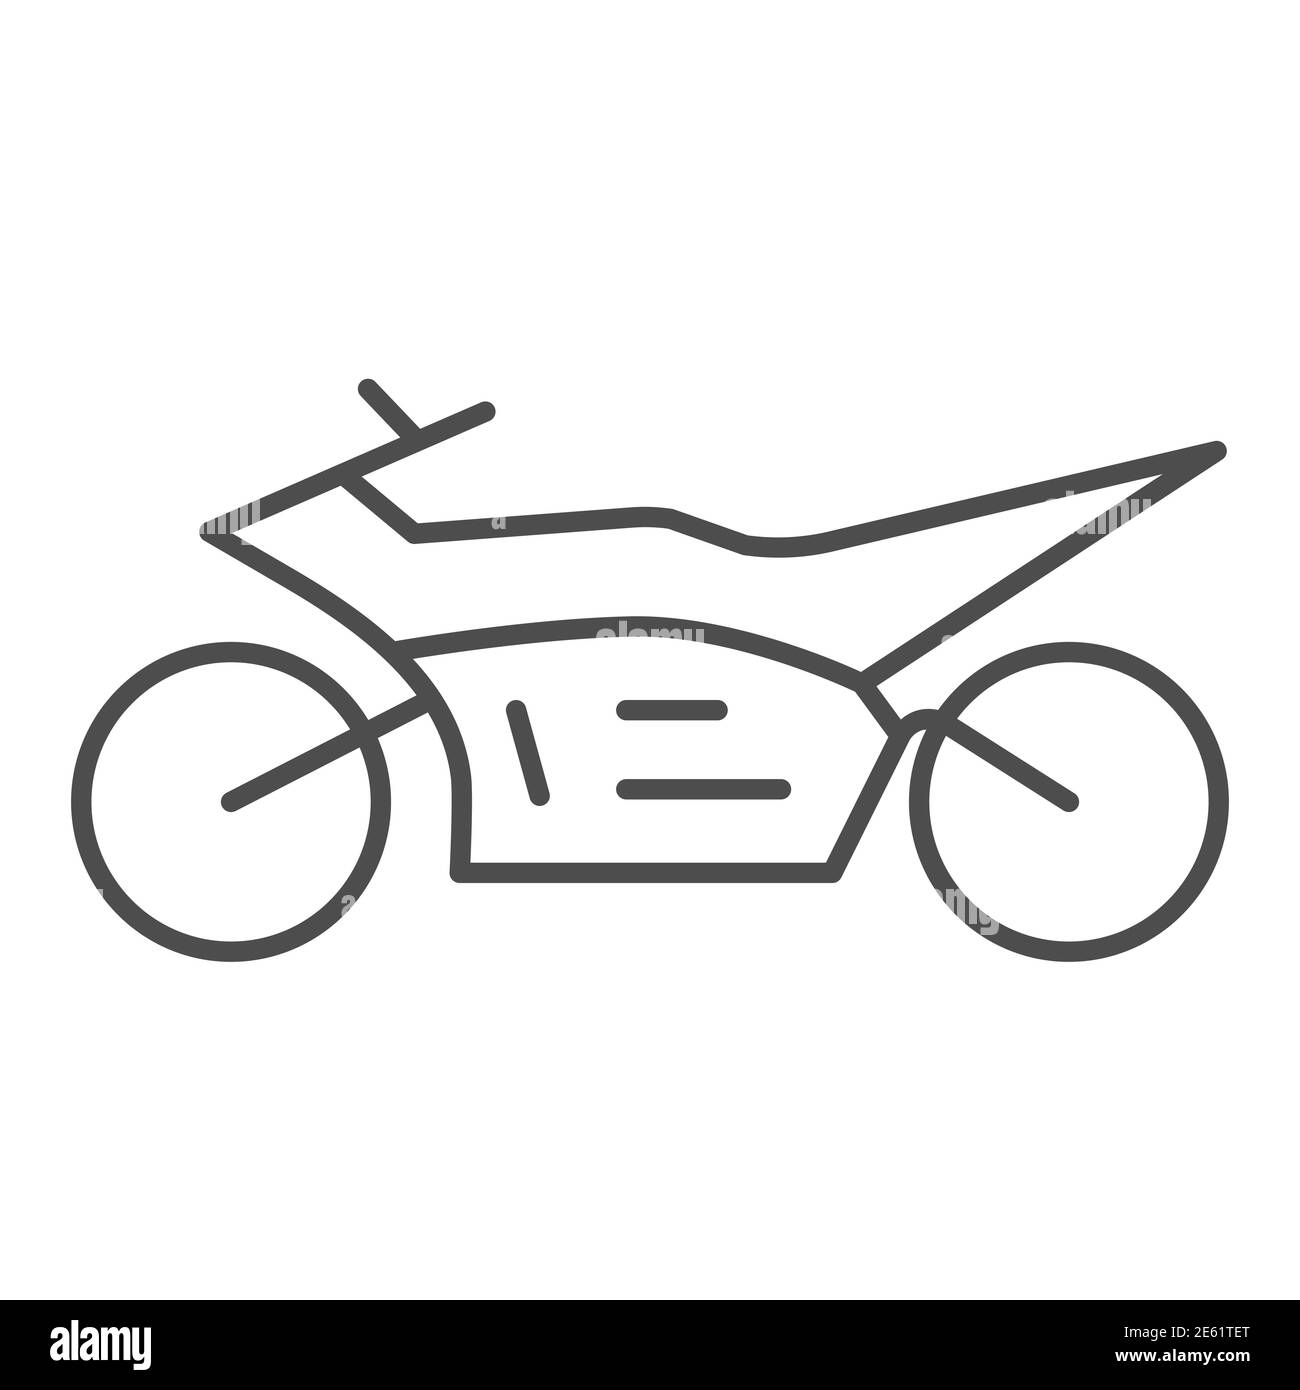 Sportbike thin line icon, speed road transport symbol, motocross motorbike vector sign on white background, sport motorcycle icon outline style for Stock Vector